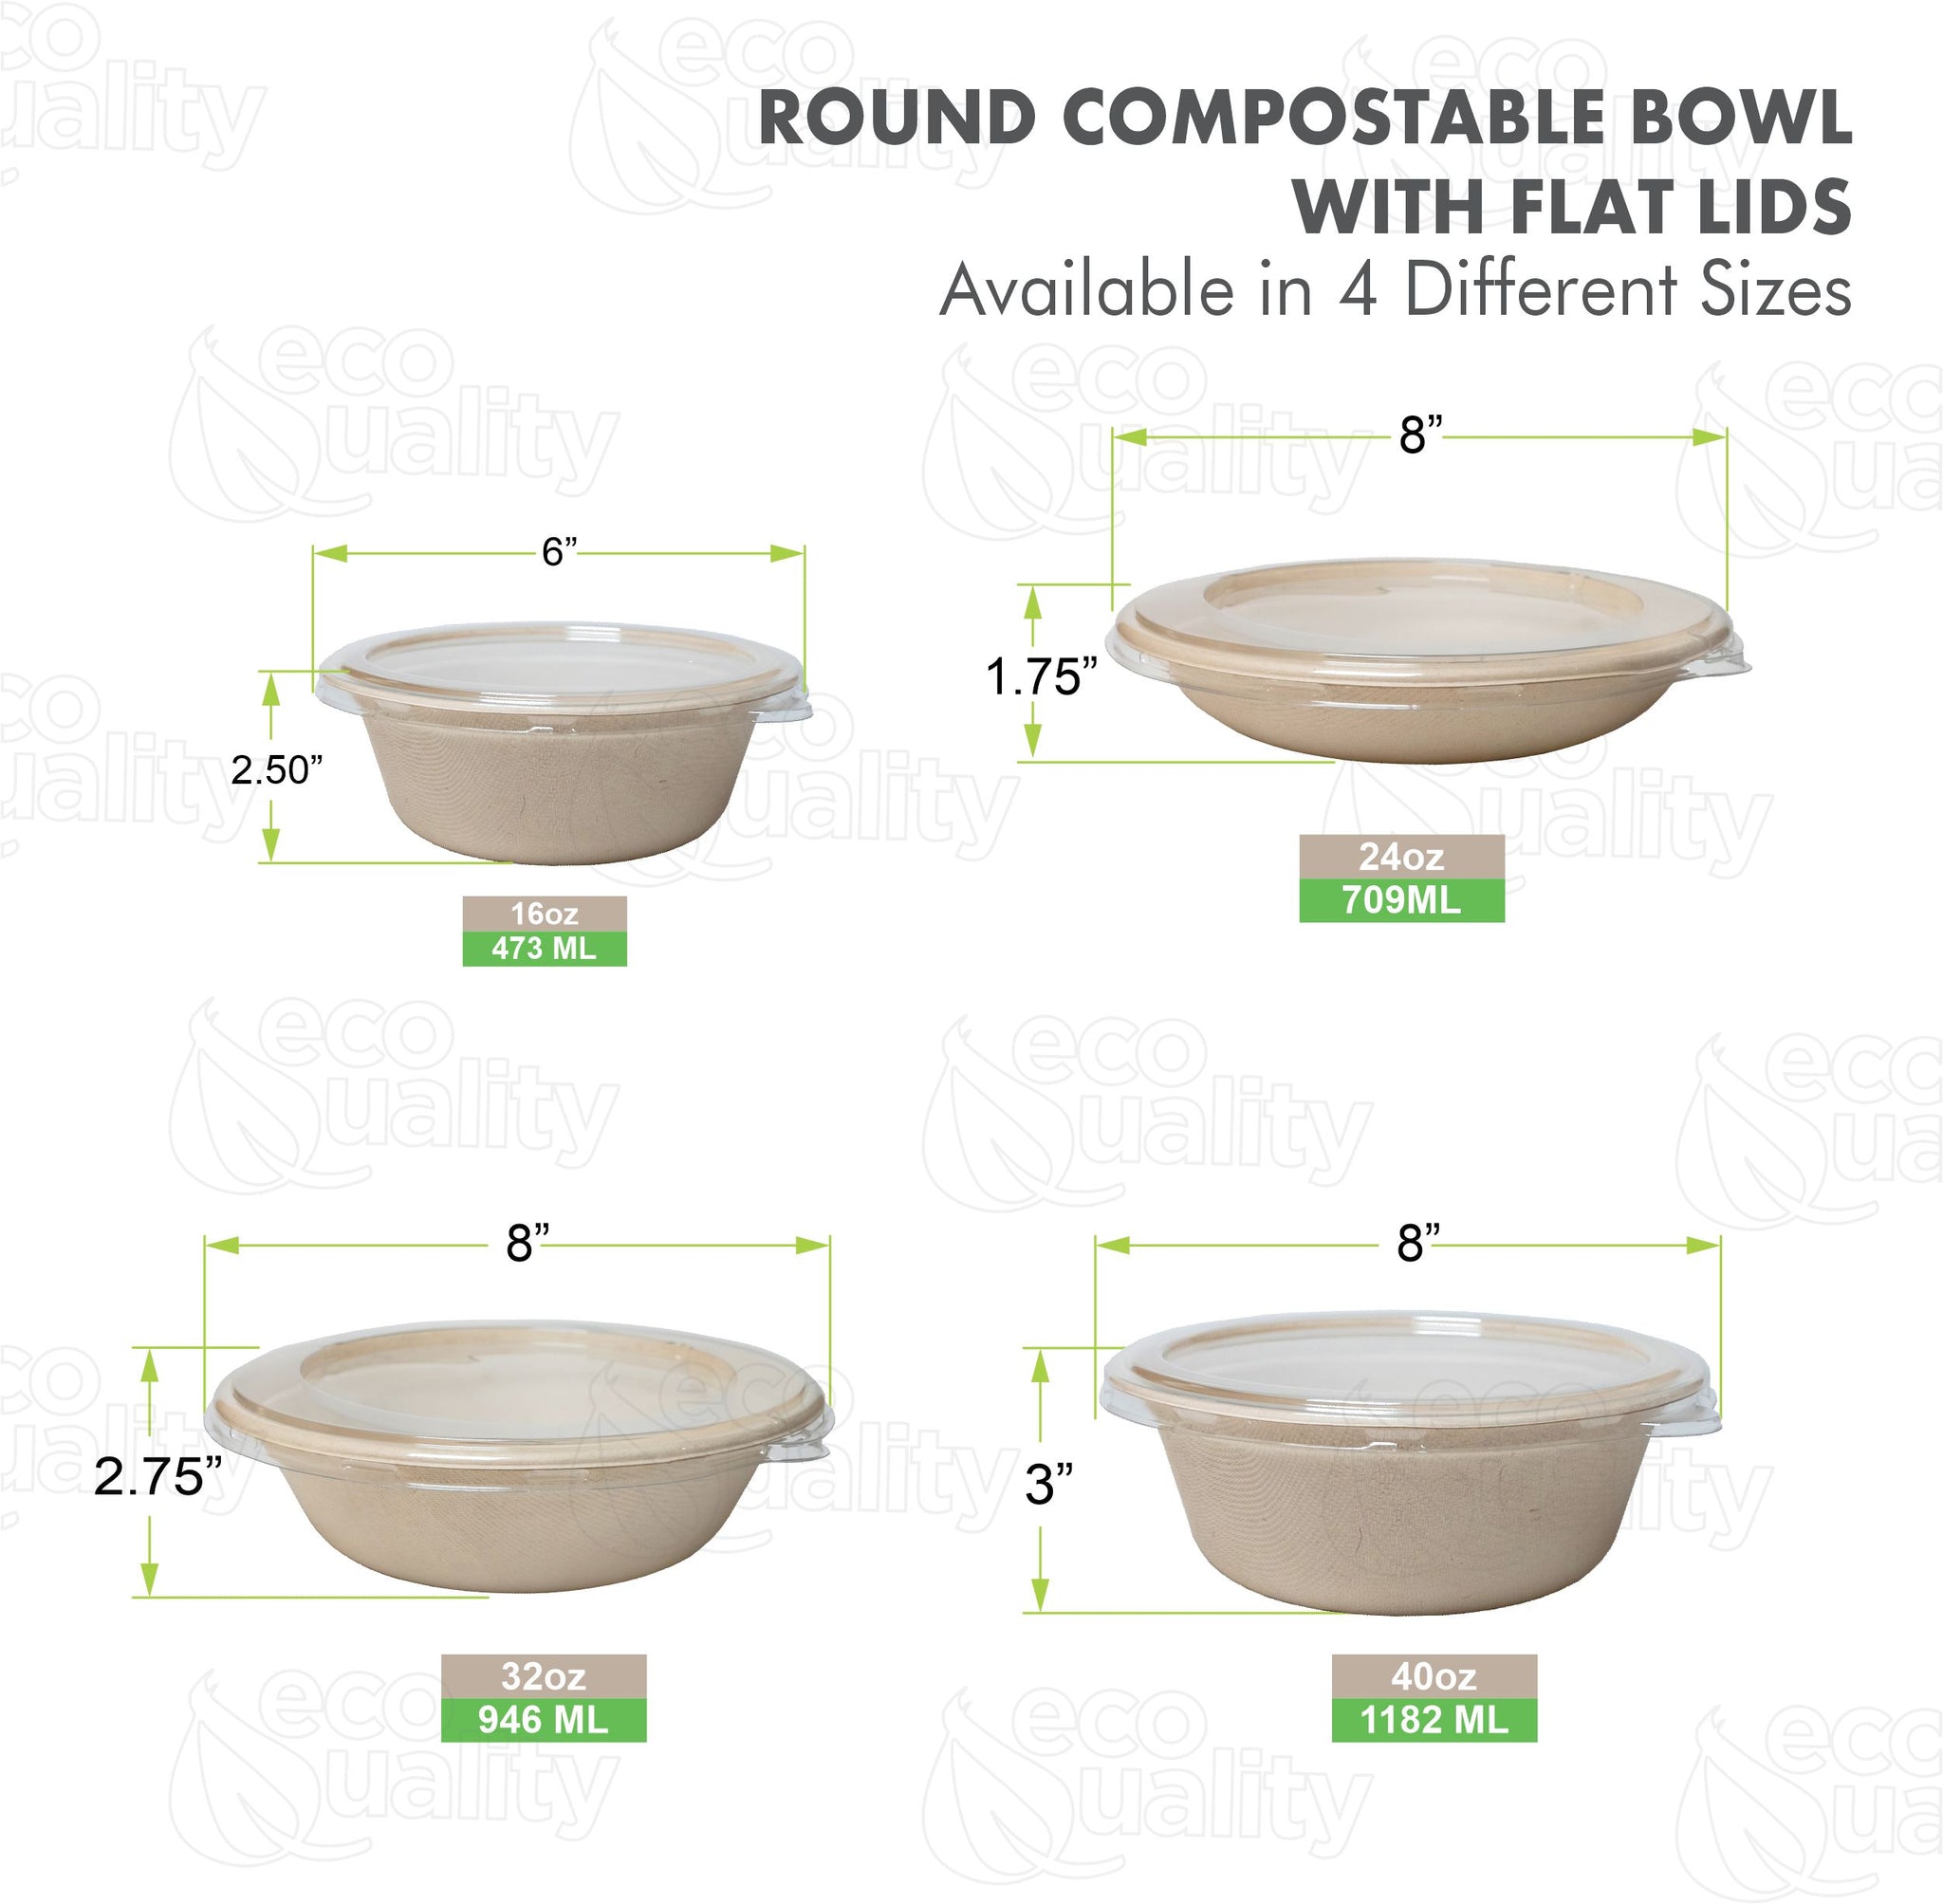 kraftbowl disposableproducts Microwavesafe LeakResistant bowl soupbowl Biodegradable Bowls sugarcane bowl ice cream bowl disposable bowl heavyduty bowl zerowaste ecofriendly plasticfree 24 ounces 24 oz breakfast bowl dinner bowl lunch bowl poke bowl with lid acai bowl 16oz 32oz 40oz bowls with lid takeout service rice catering bowls with snapping lid